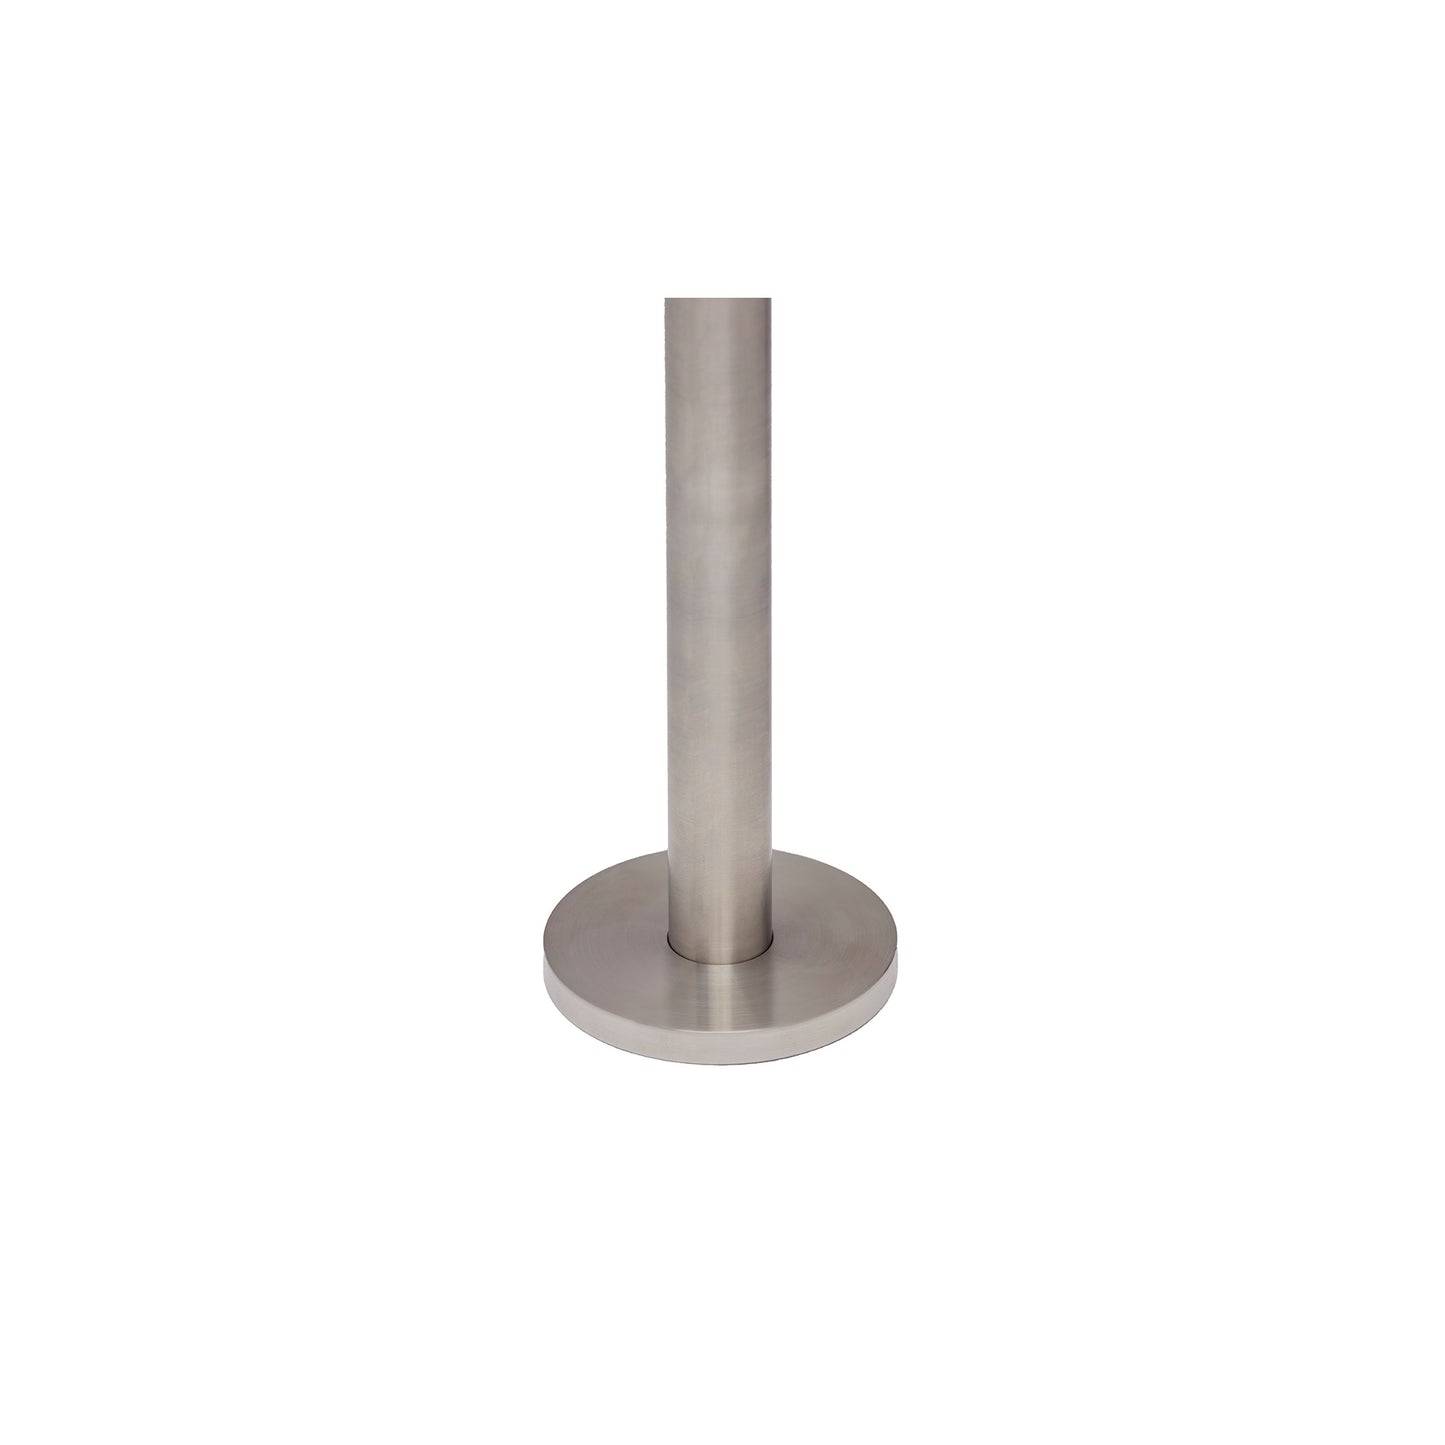 Small Surface Mounted Stanchion - 406mm high